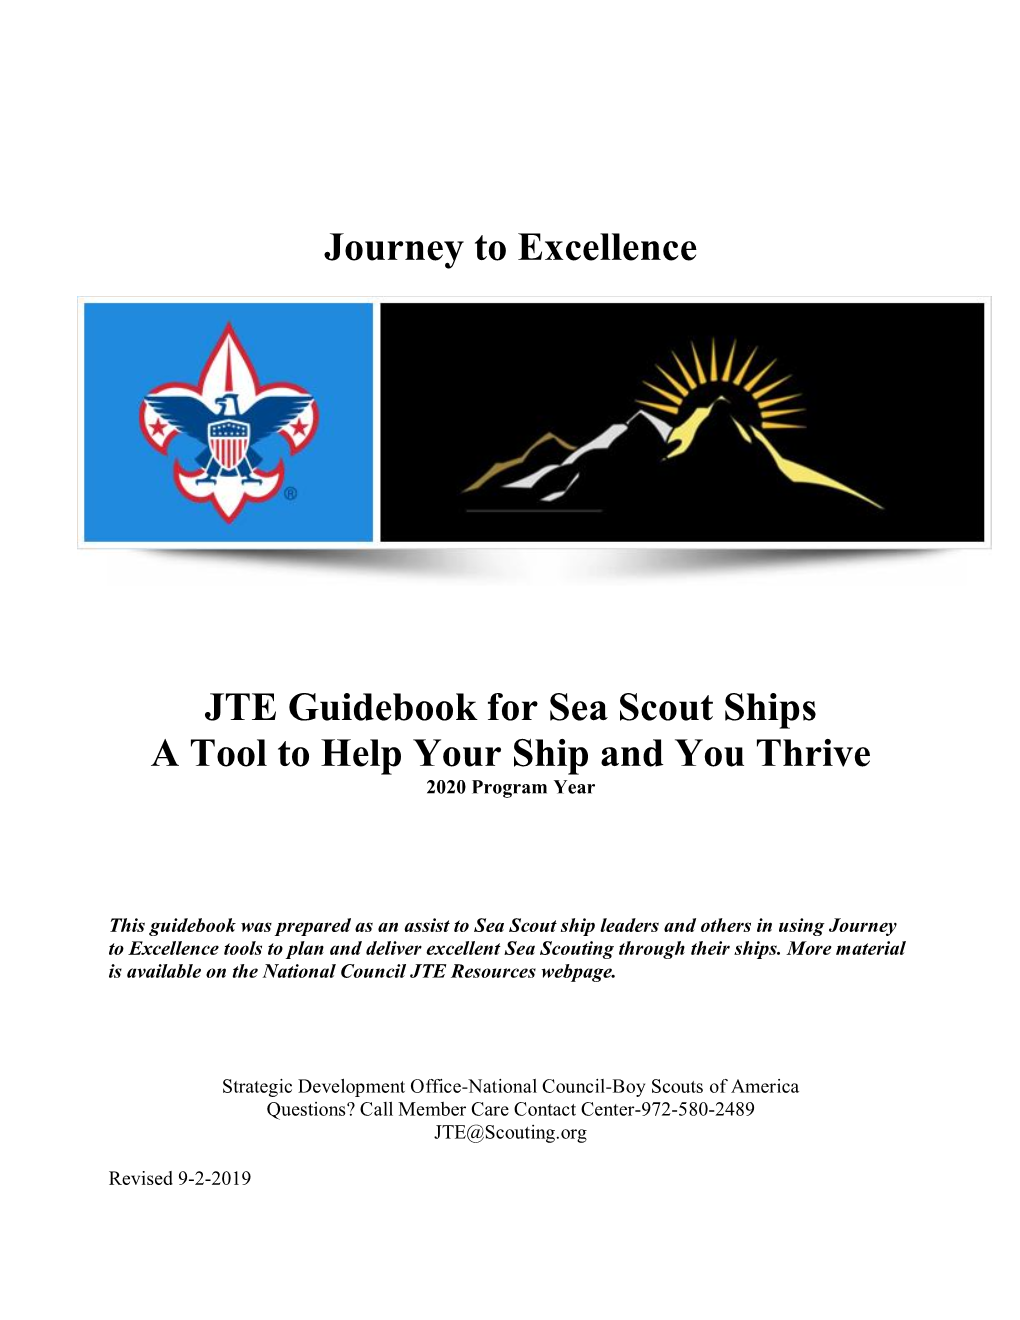 JTE Guideook for Sea Scout Ships